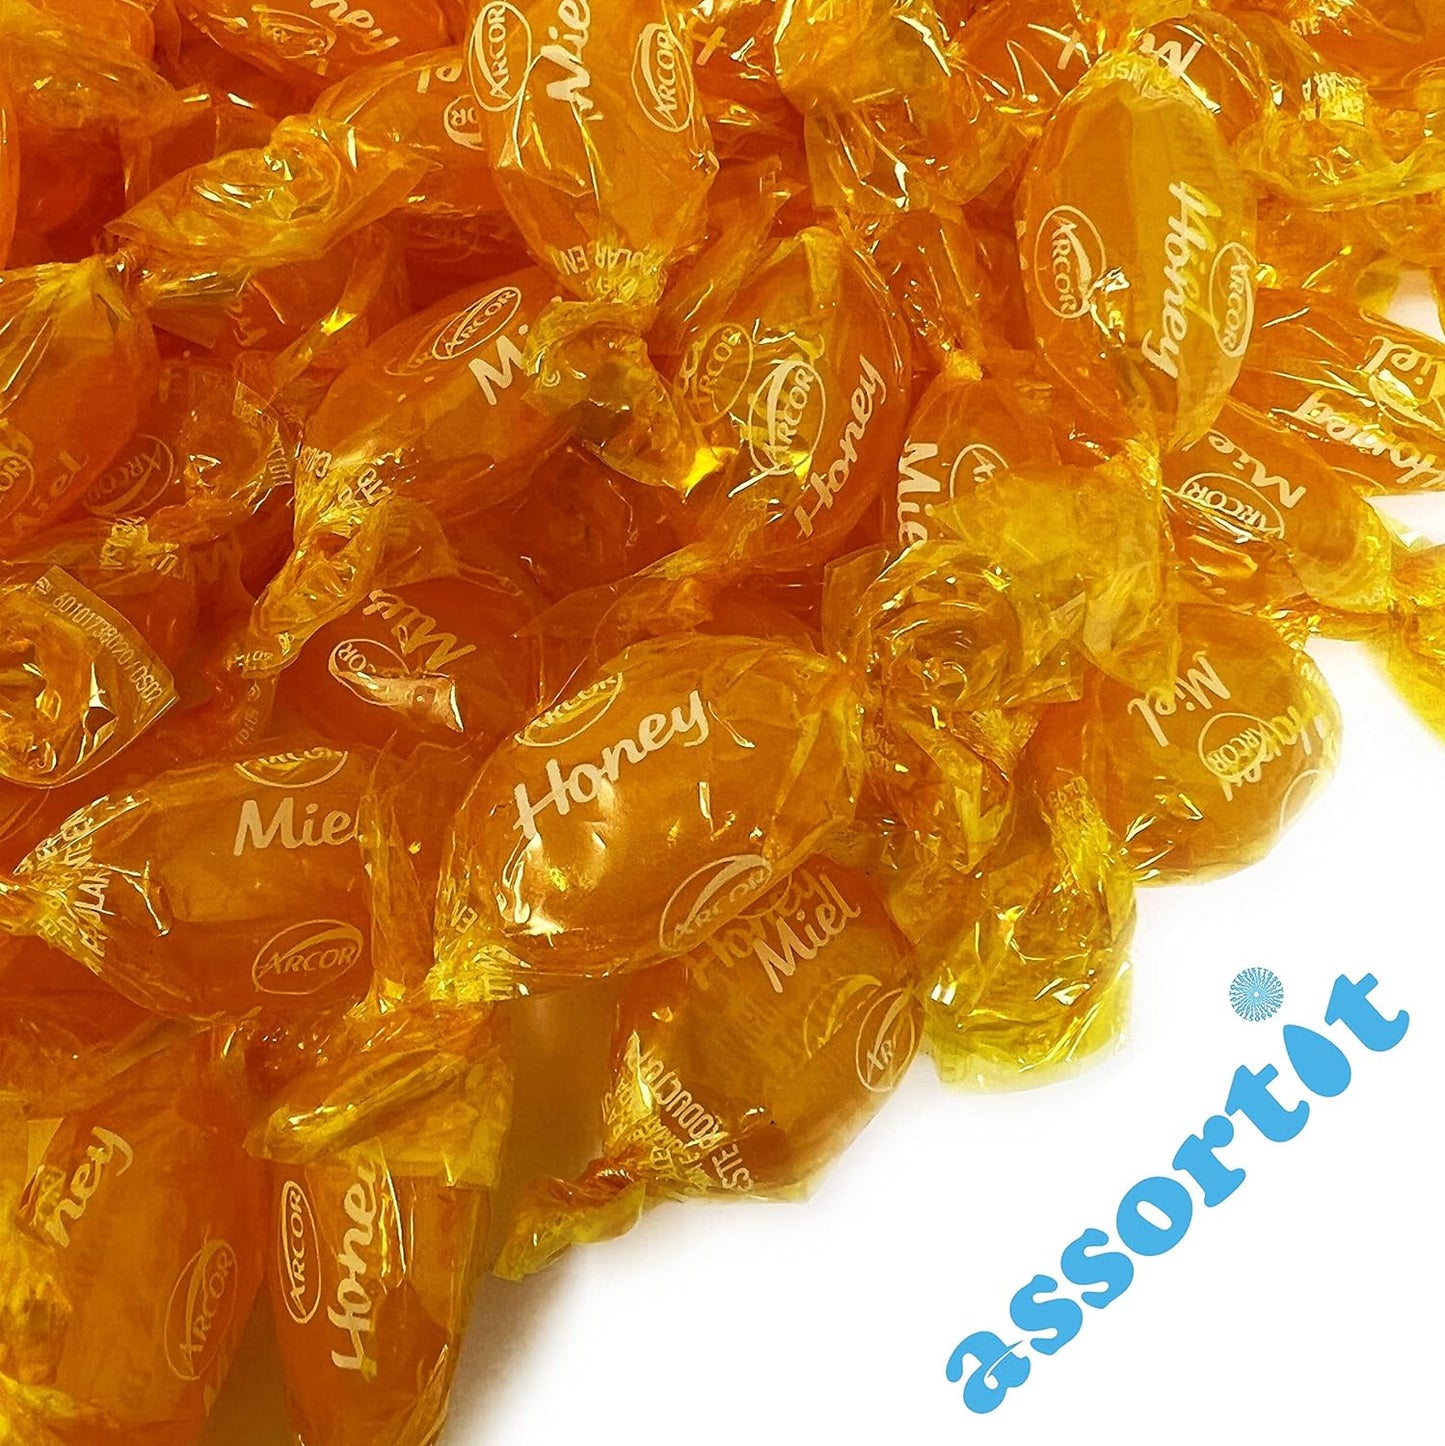 Arcor Honey Filled Hard Candy - 6 lbs Honey Flavored Classic Filled With Real Honey 96 oz.